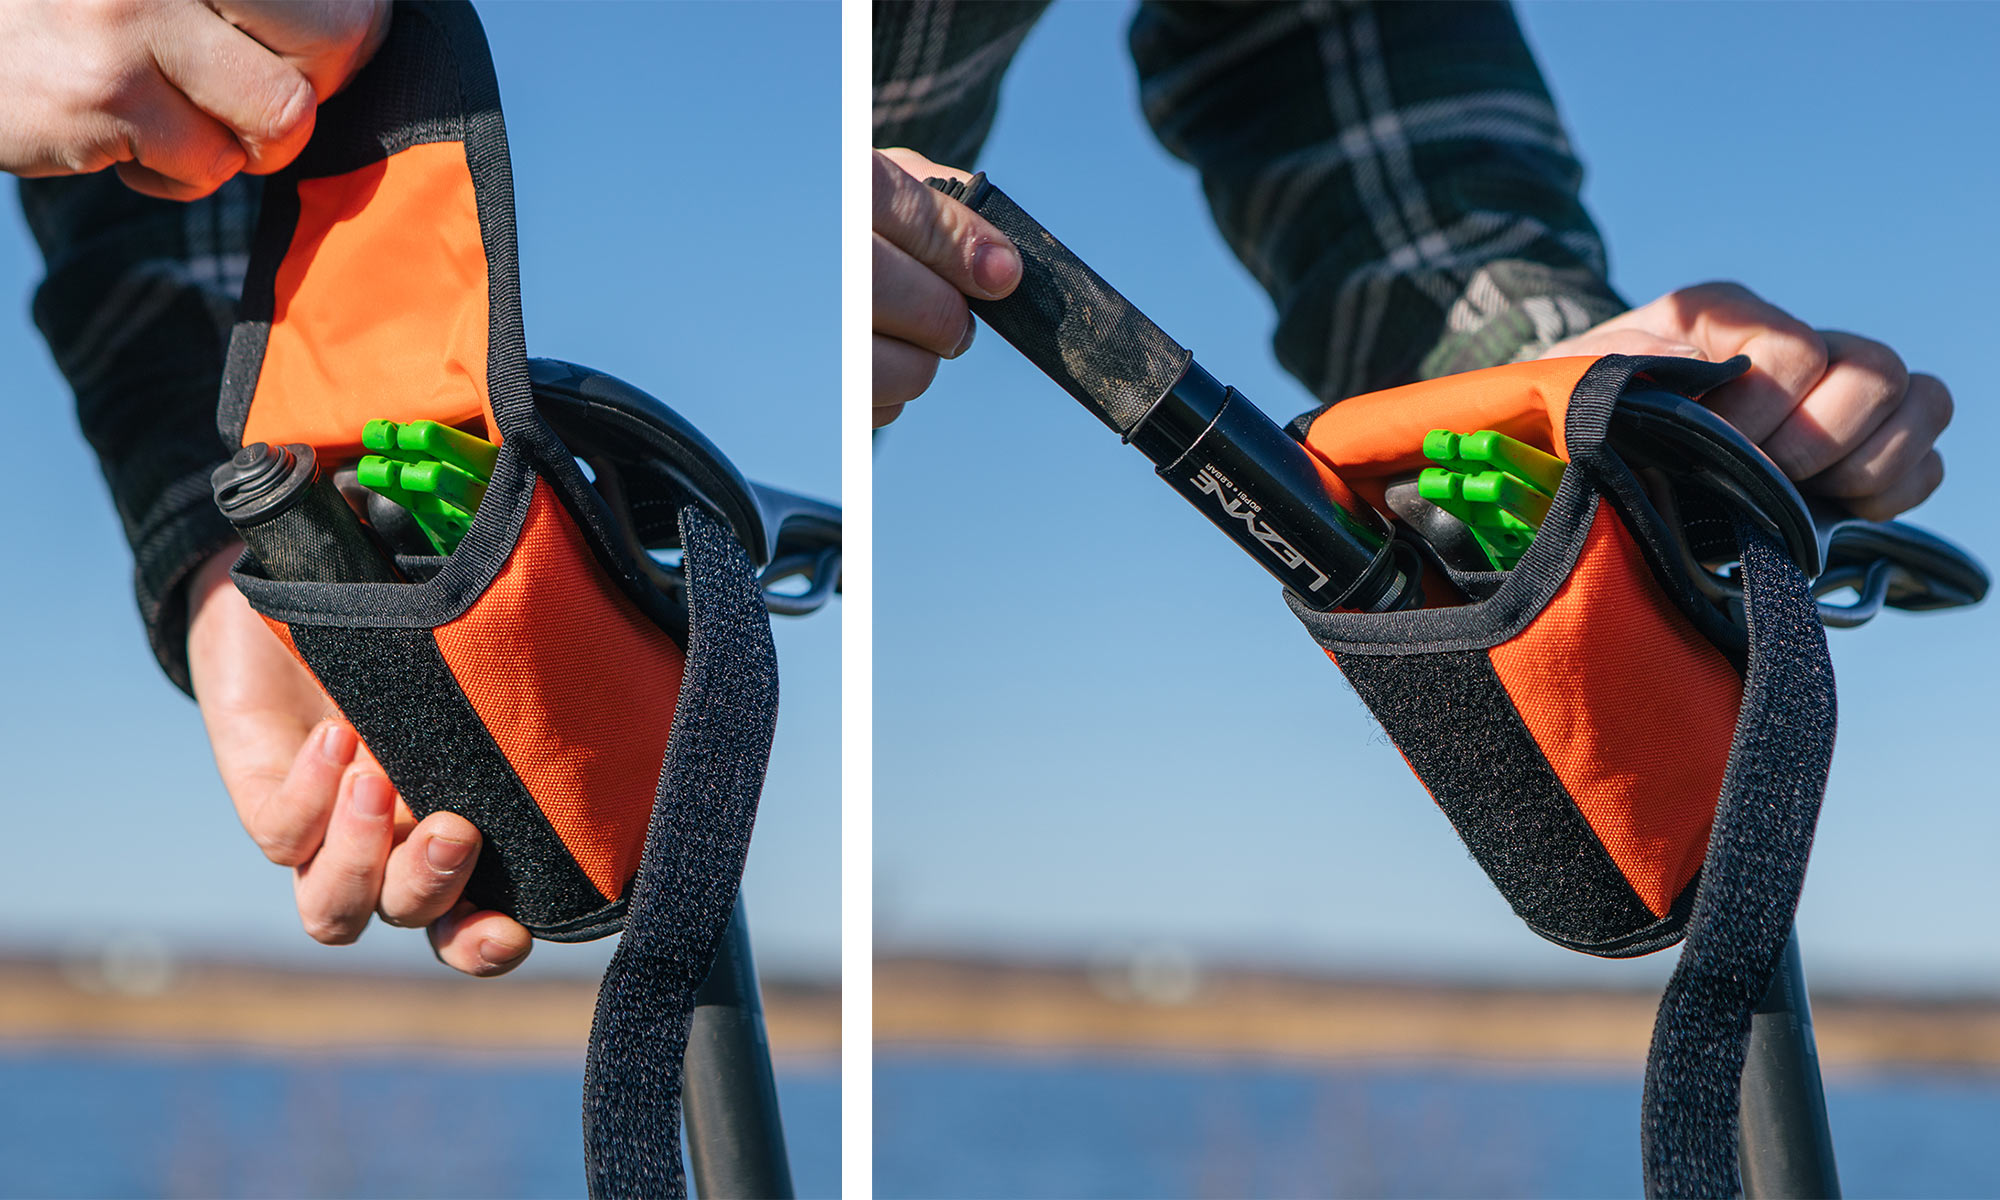 Restrap Tool Pouch Carries All Your Spares in Heavy-Duty Mini